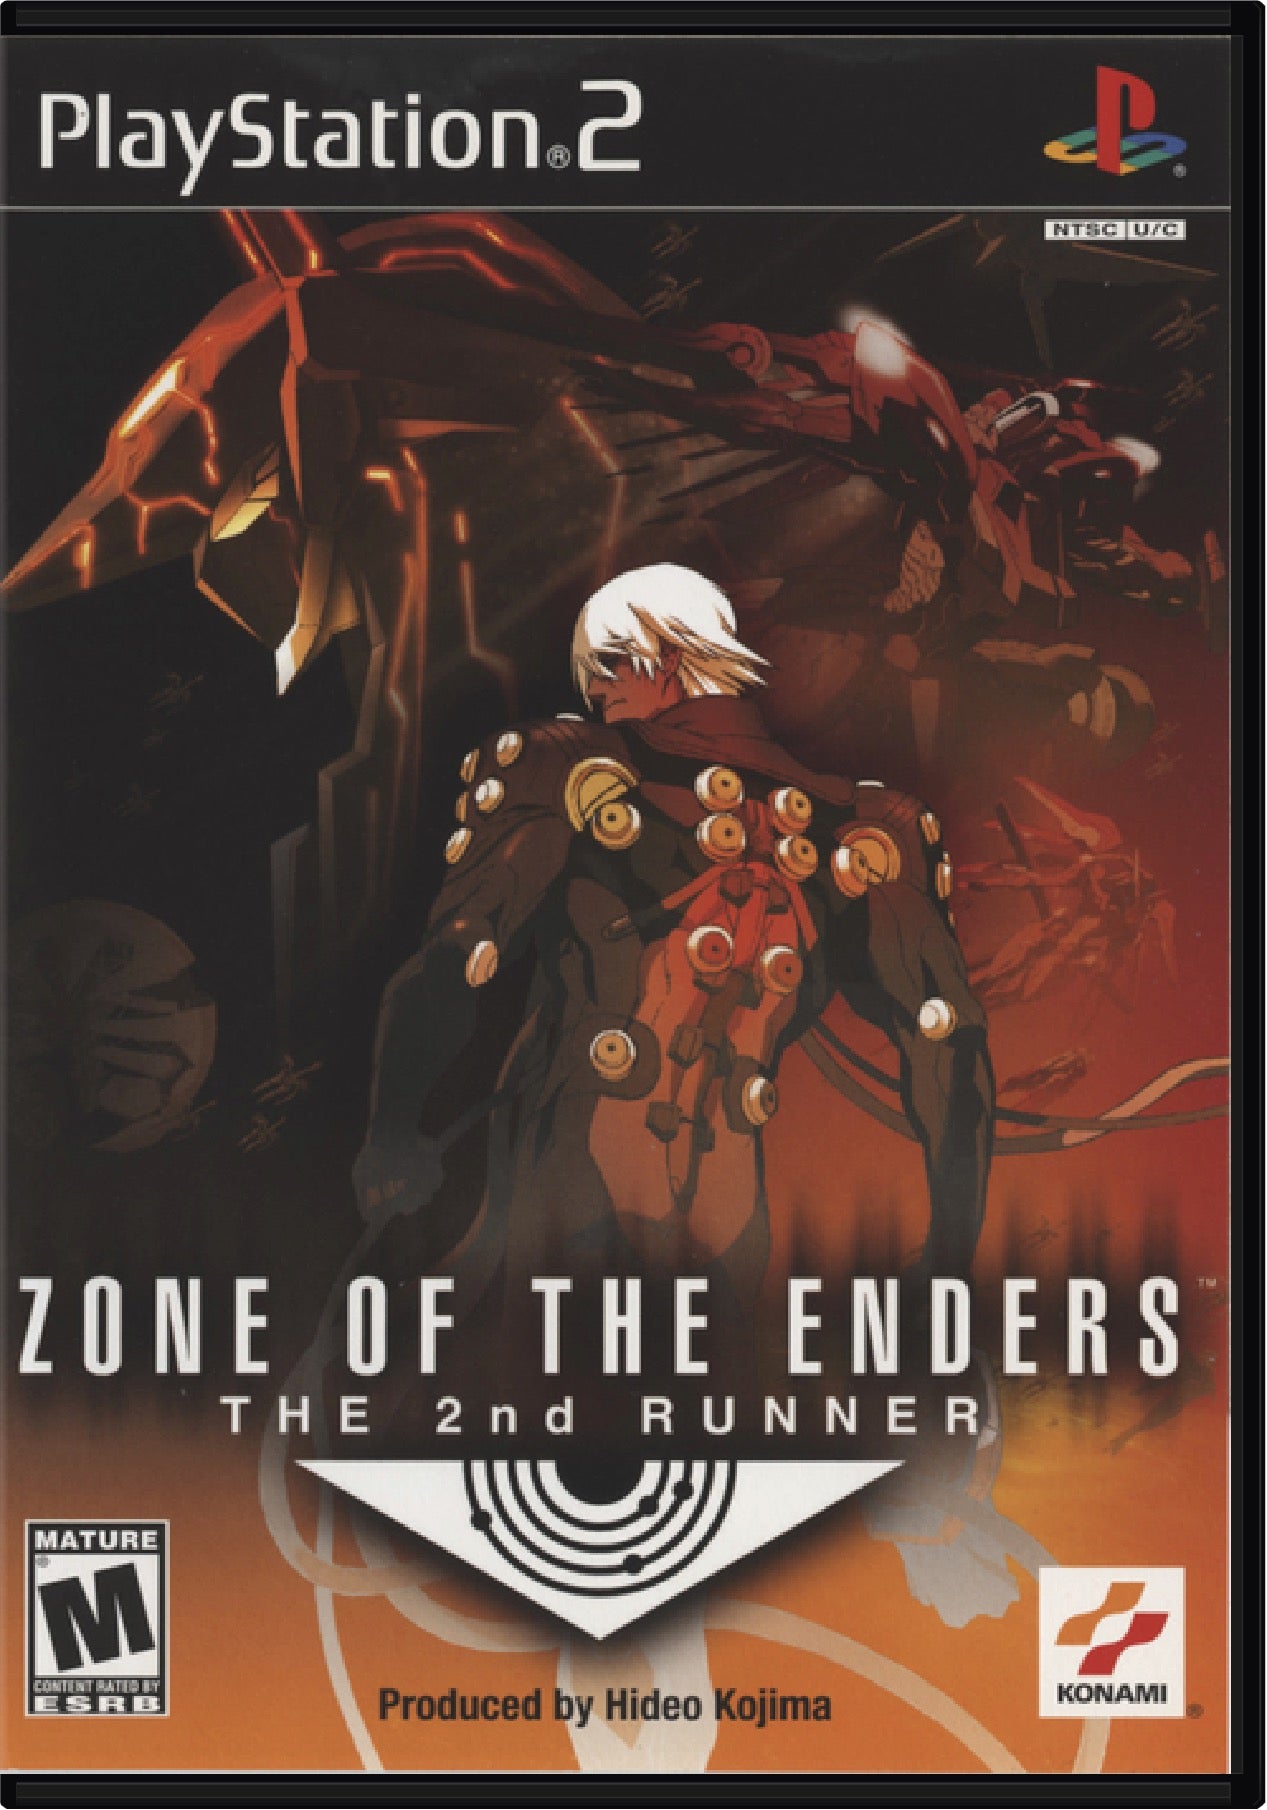 Zone of the Enders 2nd Runner Cover Art and Product Photo